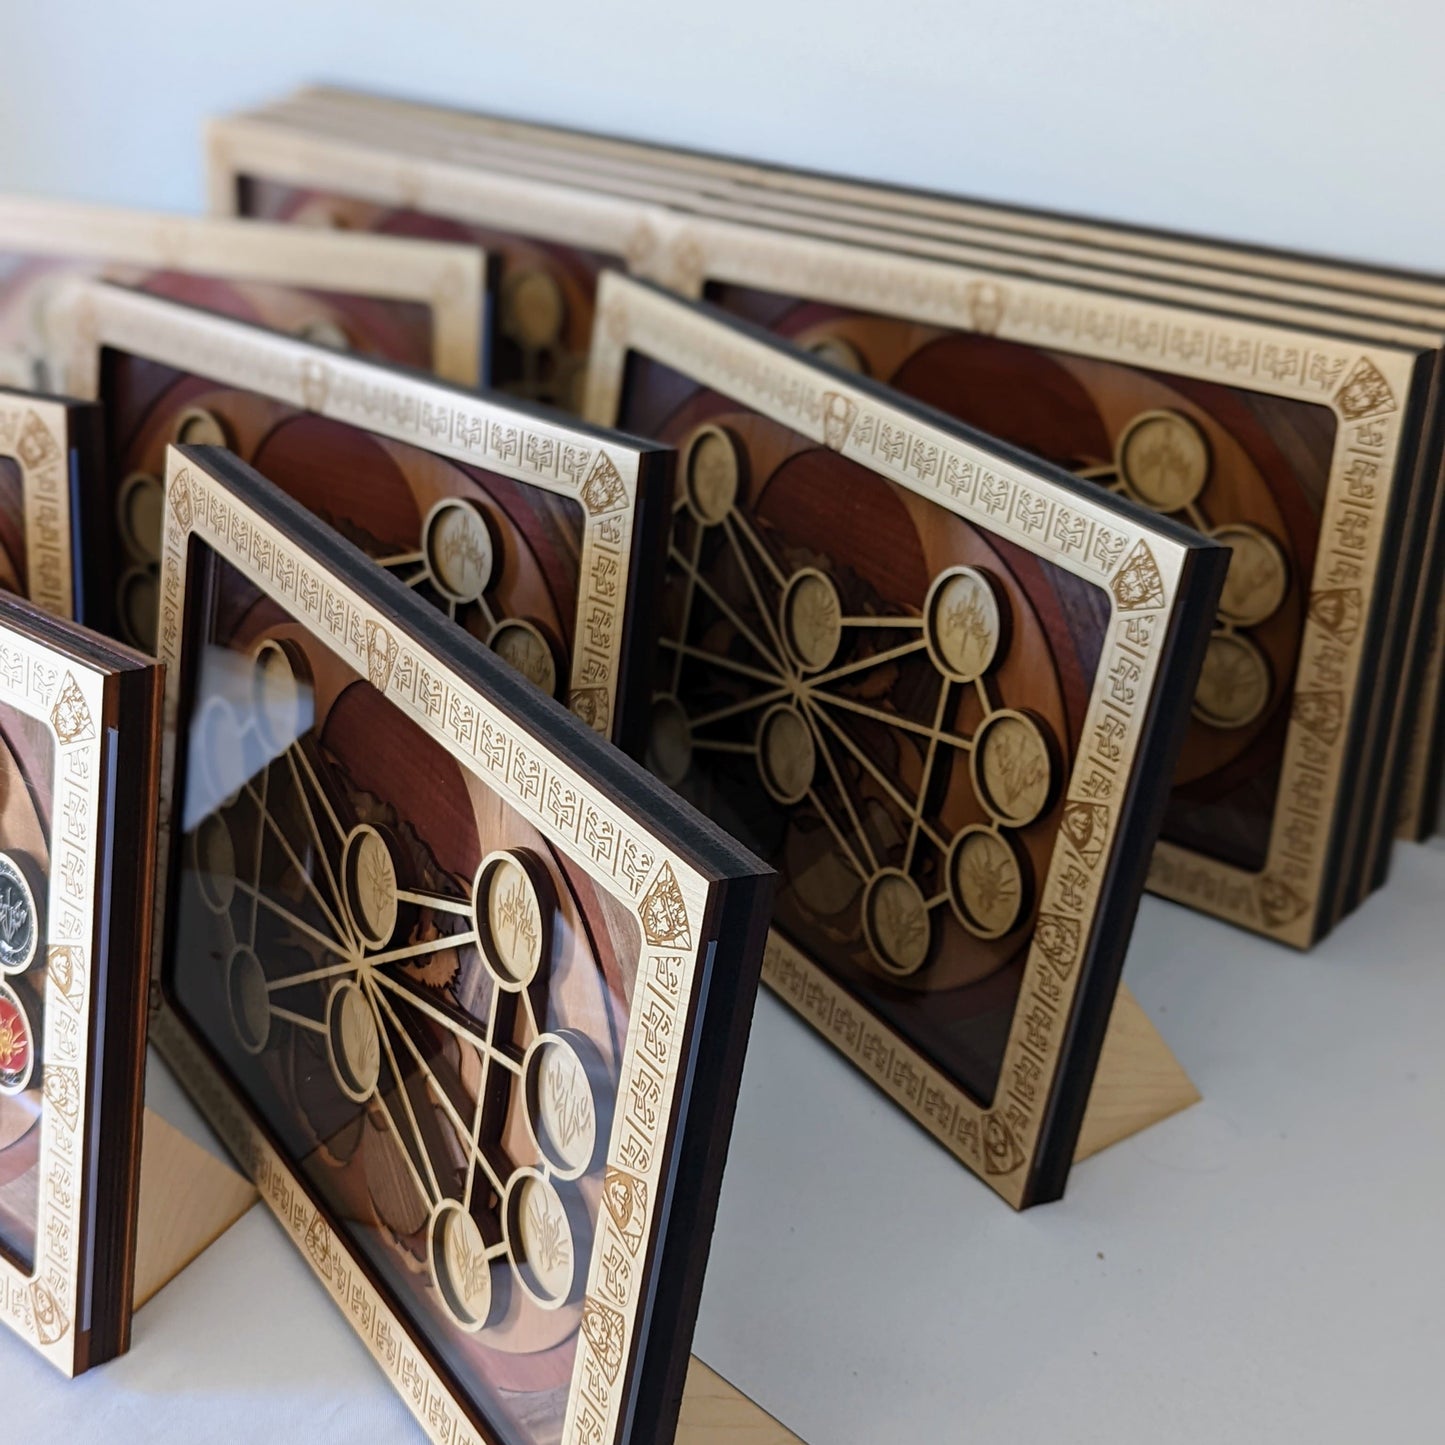 The Eye of Stormlight & Wit Box Wooden Challenge Coin Display based on The Way of Kings by Brandon Sanderson and Original Double Eye of The Almighty Art by Isaac Stewart